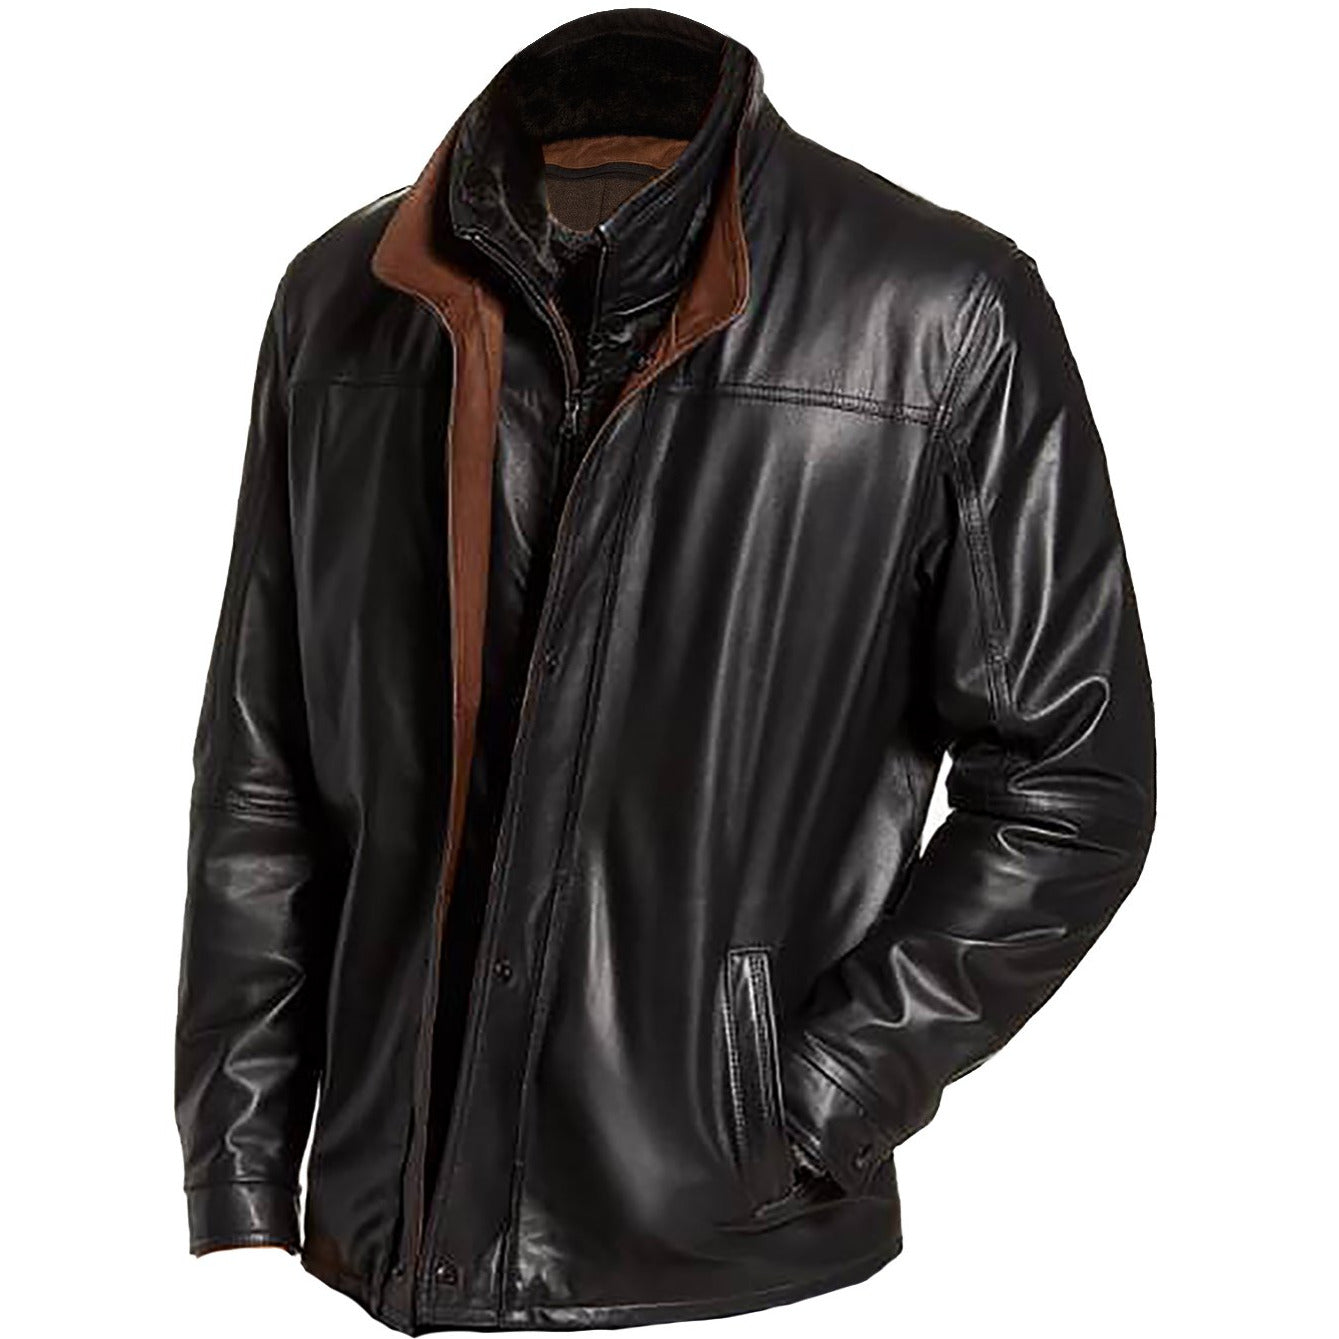 6286 - Mens Leather Coat with Shearling Fur Collar Noir/Rustic